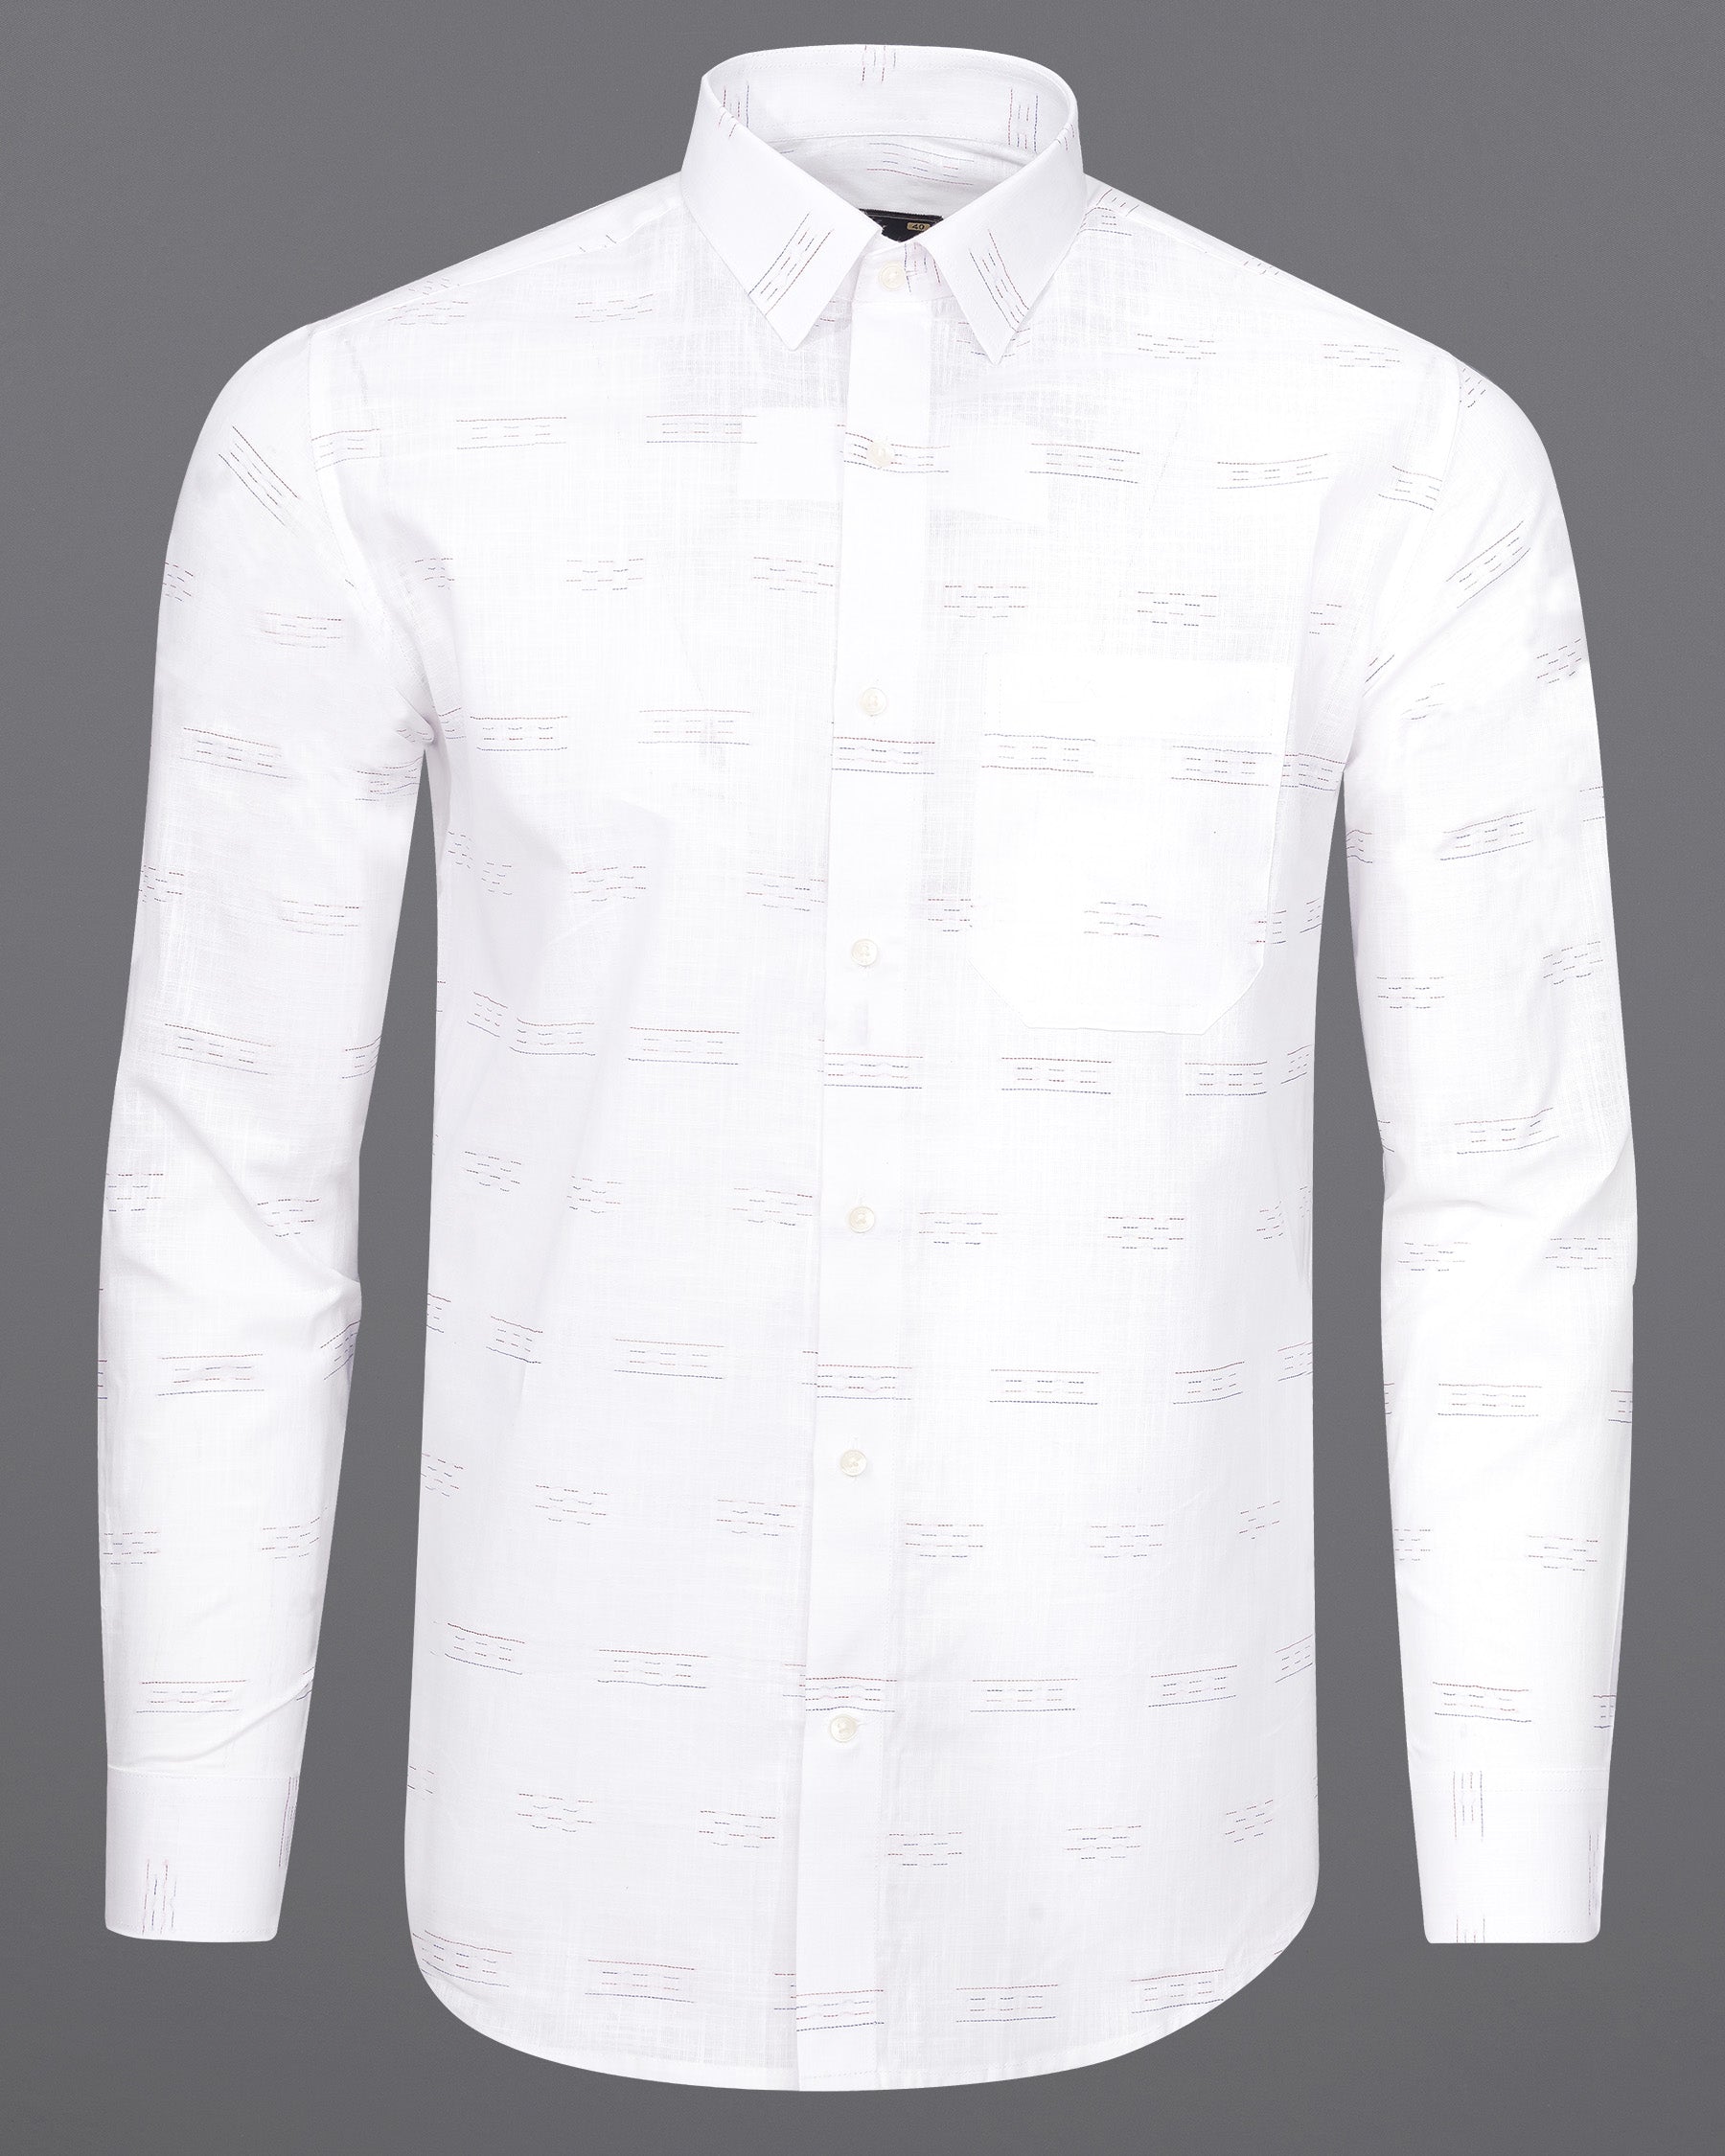 Bright White with Small Multicolor Dobby Textured Luxurious Linen Shirt 7522-38, 7522-H-38, 7522-39, 7522-H-39, 7522-40, 7522-H-40, 7522-42, 7522-H-42, 7522-44, 7522-H-44, 7522-46, 7522-H-46, 7522-48, 7522-H-48, 7522-50, 7522-H-50, 7522-52, 7522-H-52